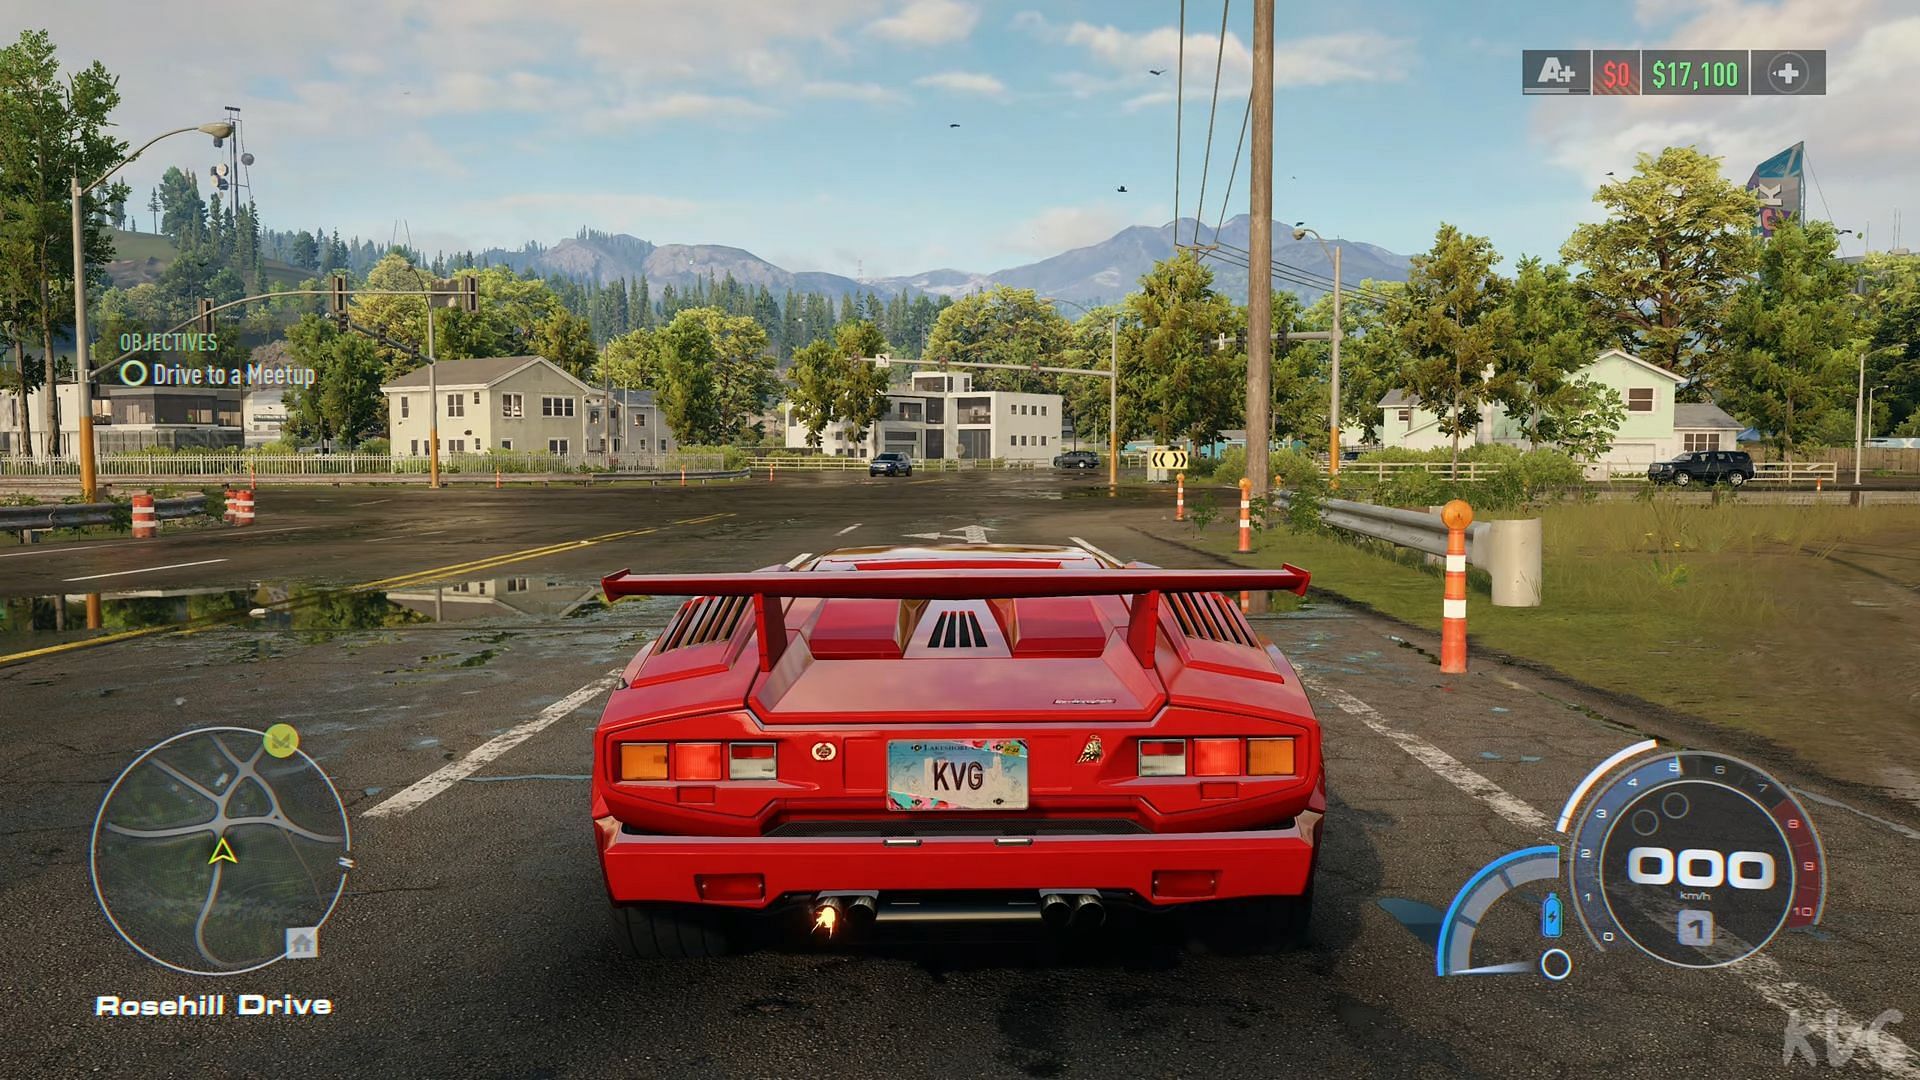 Which is the best starter car in Need for Speed Unbound?